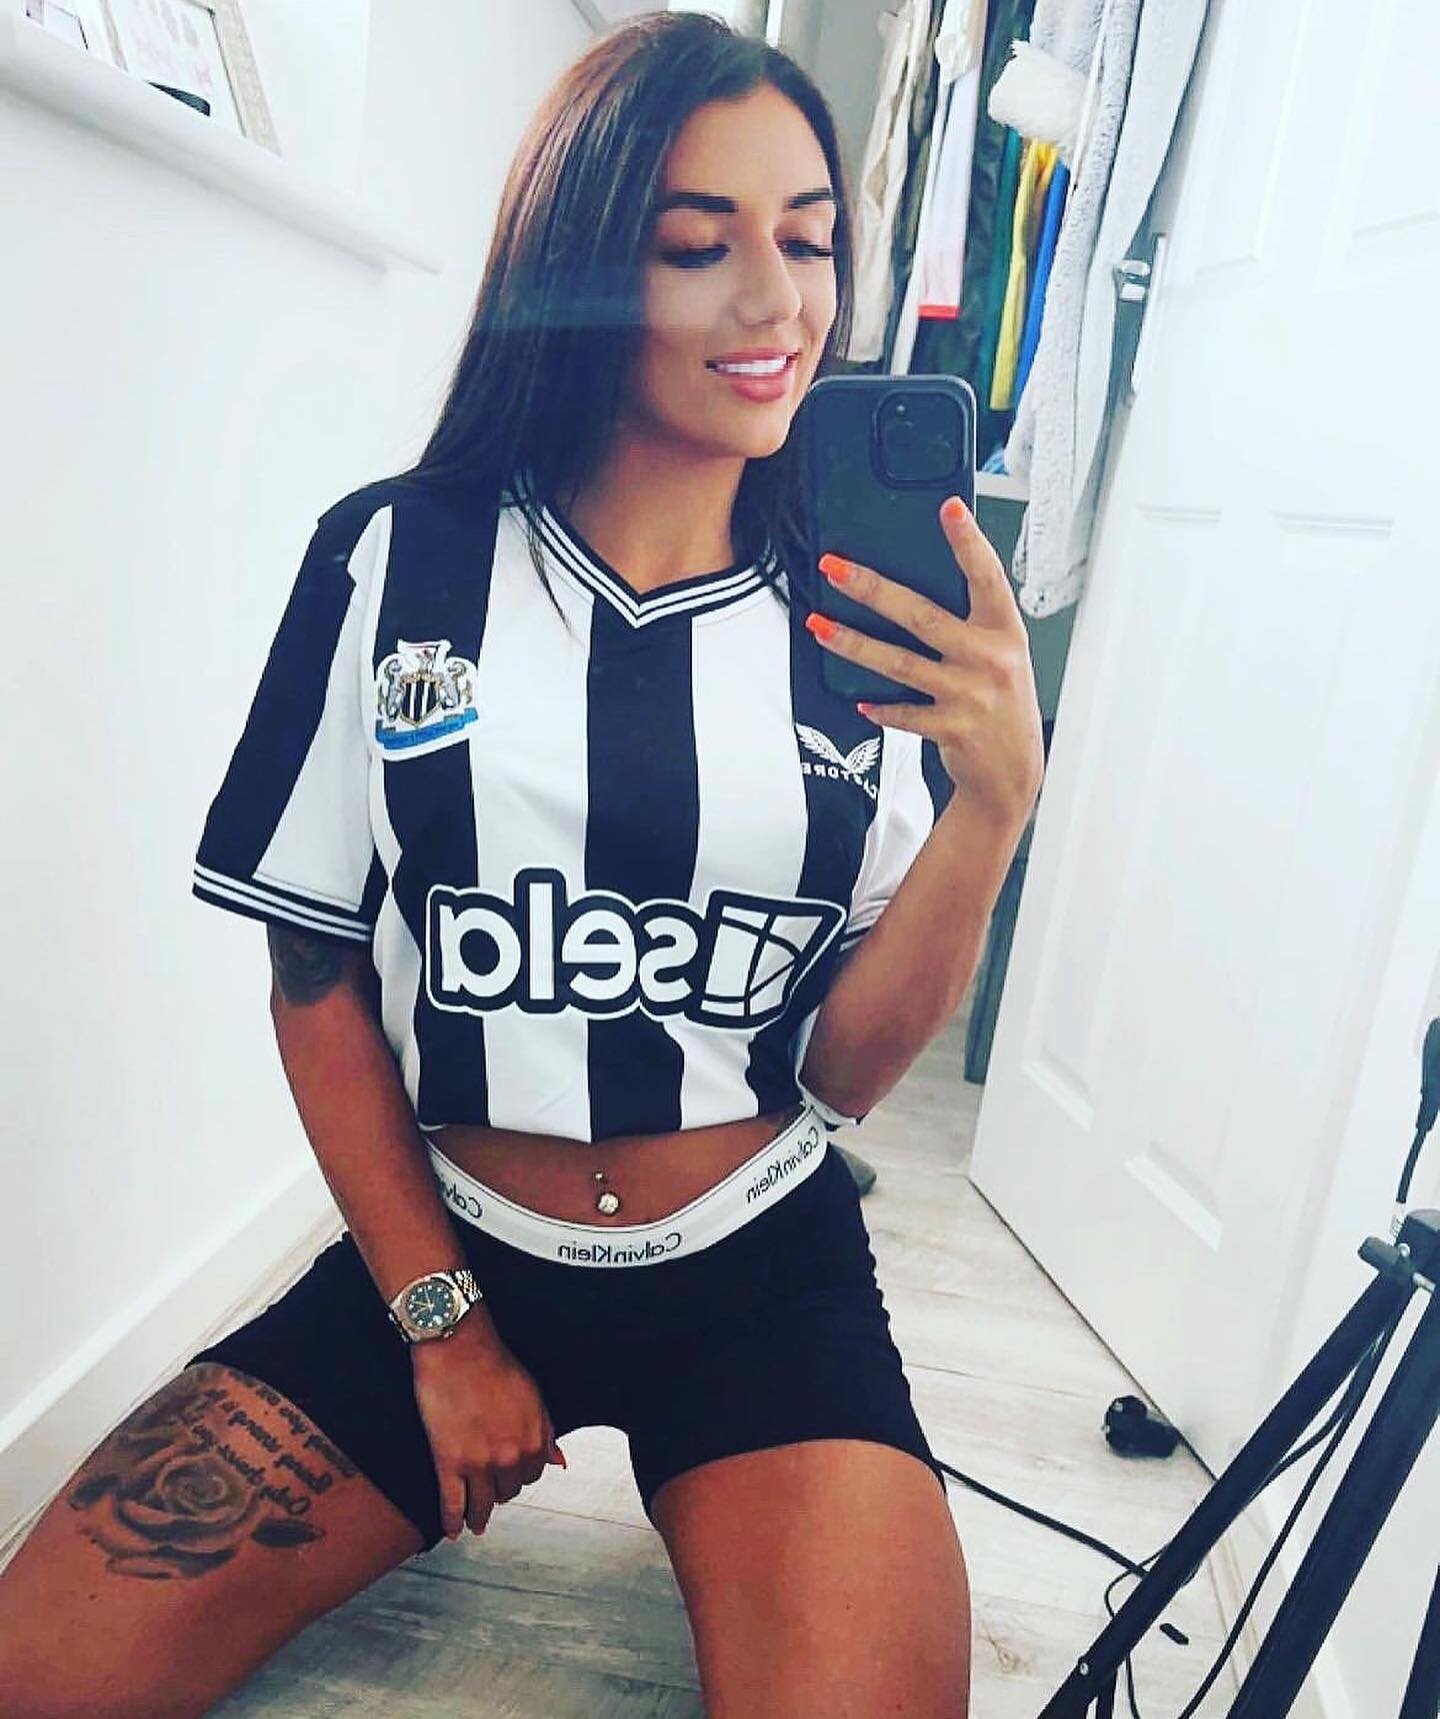 &quot;Every model looks when they proudly wear their local iconic football top. See Lauren Gallacher representing the passion, unity, and unwavering spirit of the Toon Army.&quot;

Follow @laurengallacher_ 

#nufc #newcastle #model #influencer #featu